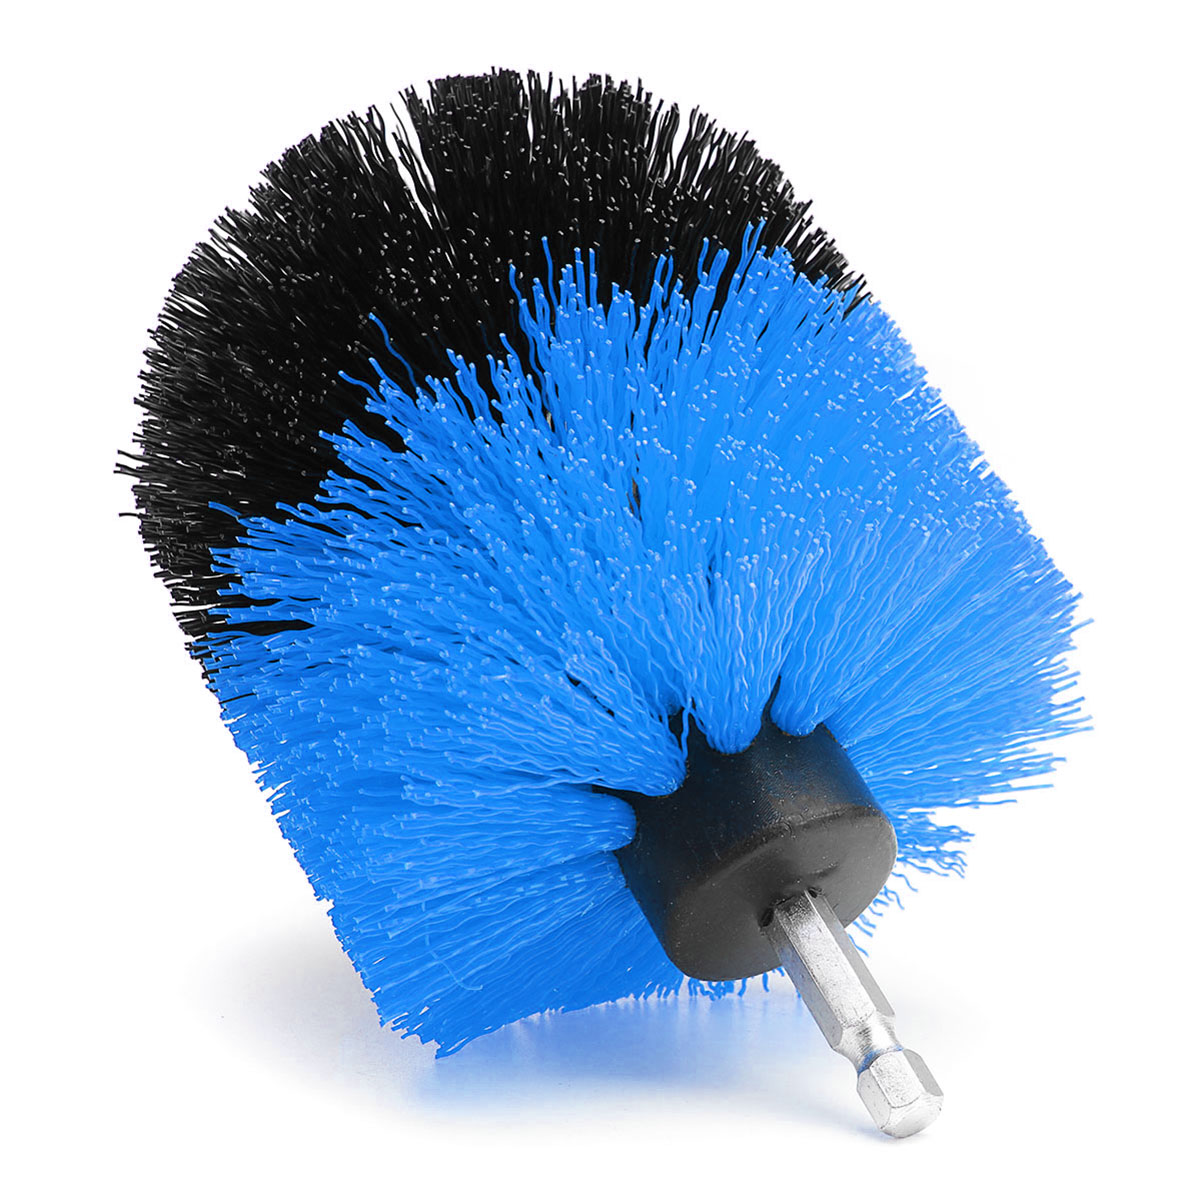 35-Inch-Drill-Cleaning-Ball-Brush-Power-Scrubber-Bathroom-Tub-Tile-Cleaning-Tool-1329638-3